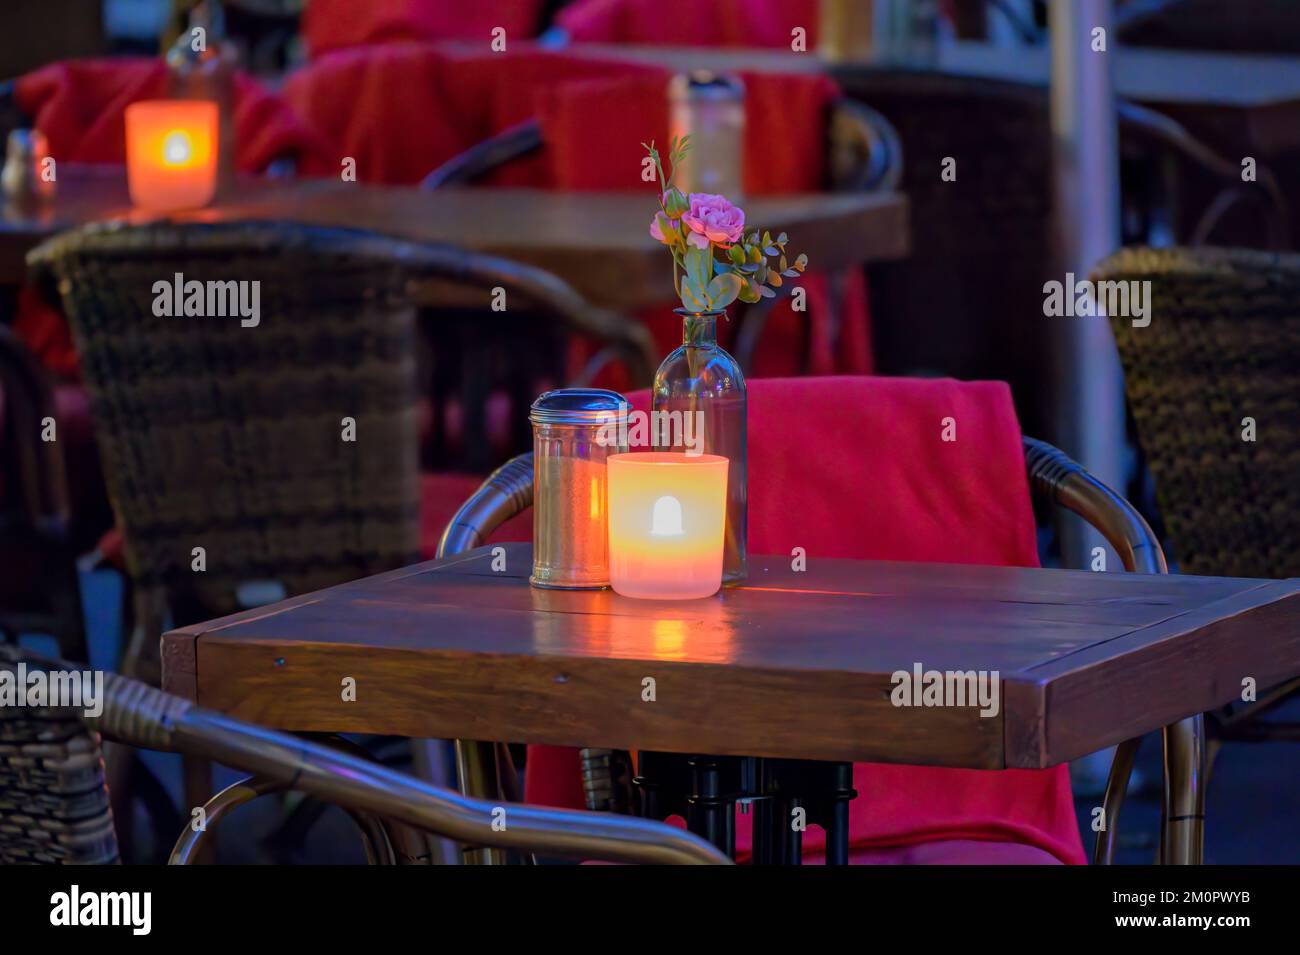 BONN, GERMANY - DECEMBER 6, 2022: Empty restaurant or cafe table with led candle Stock Photo